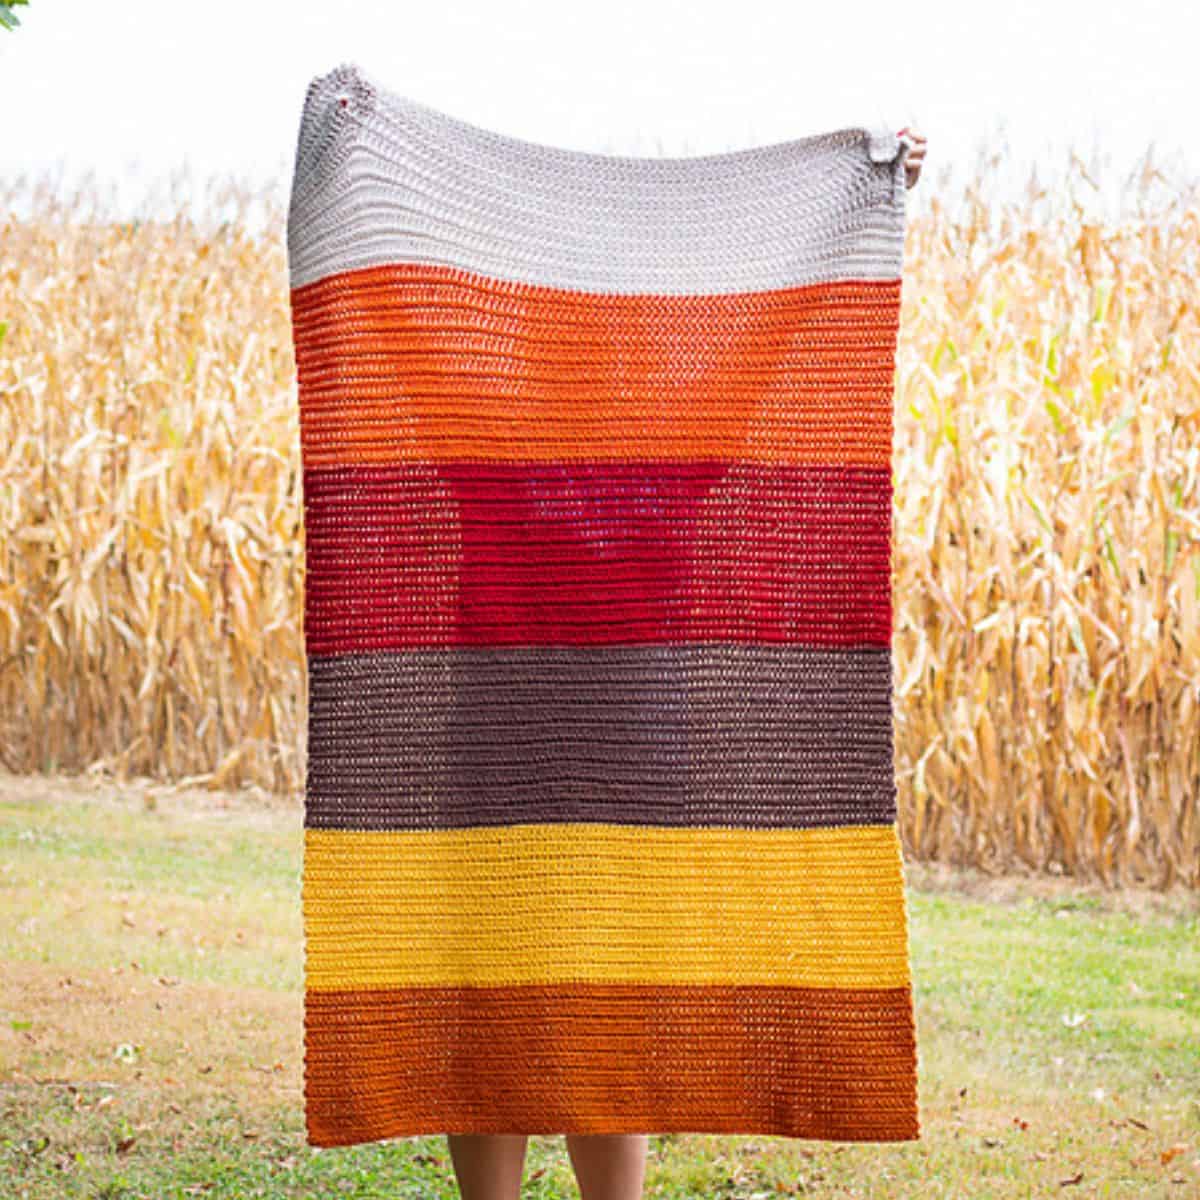 a striped crochet blanket in autumn colors being held up by a person in a field